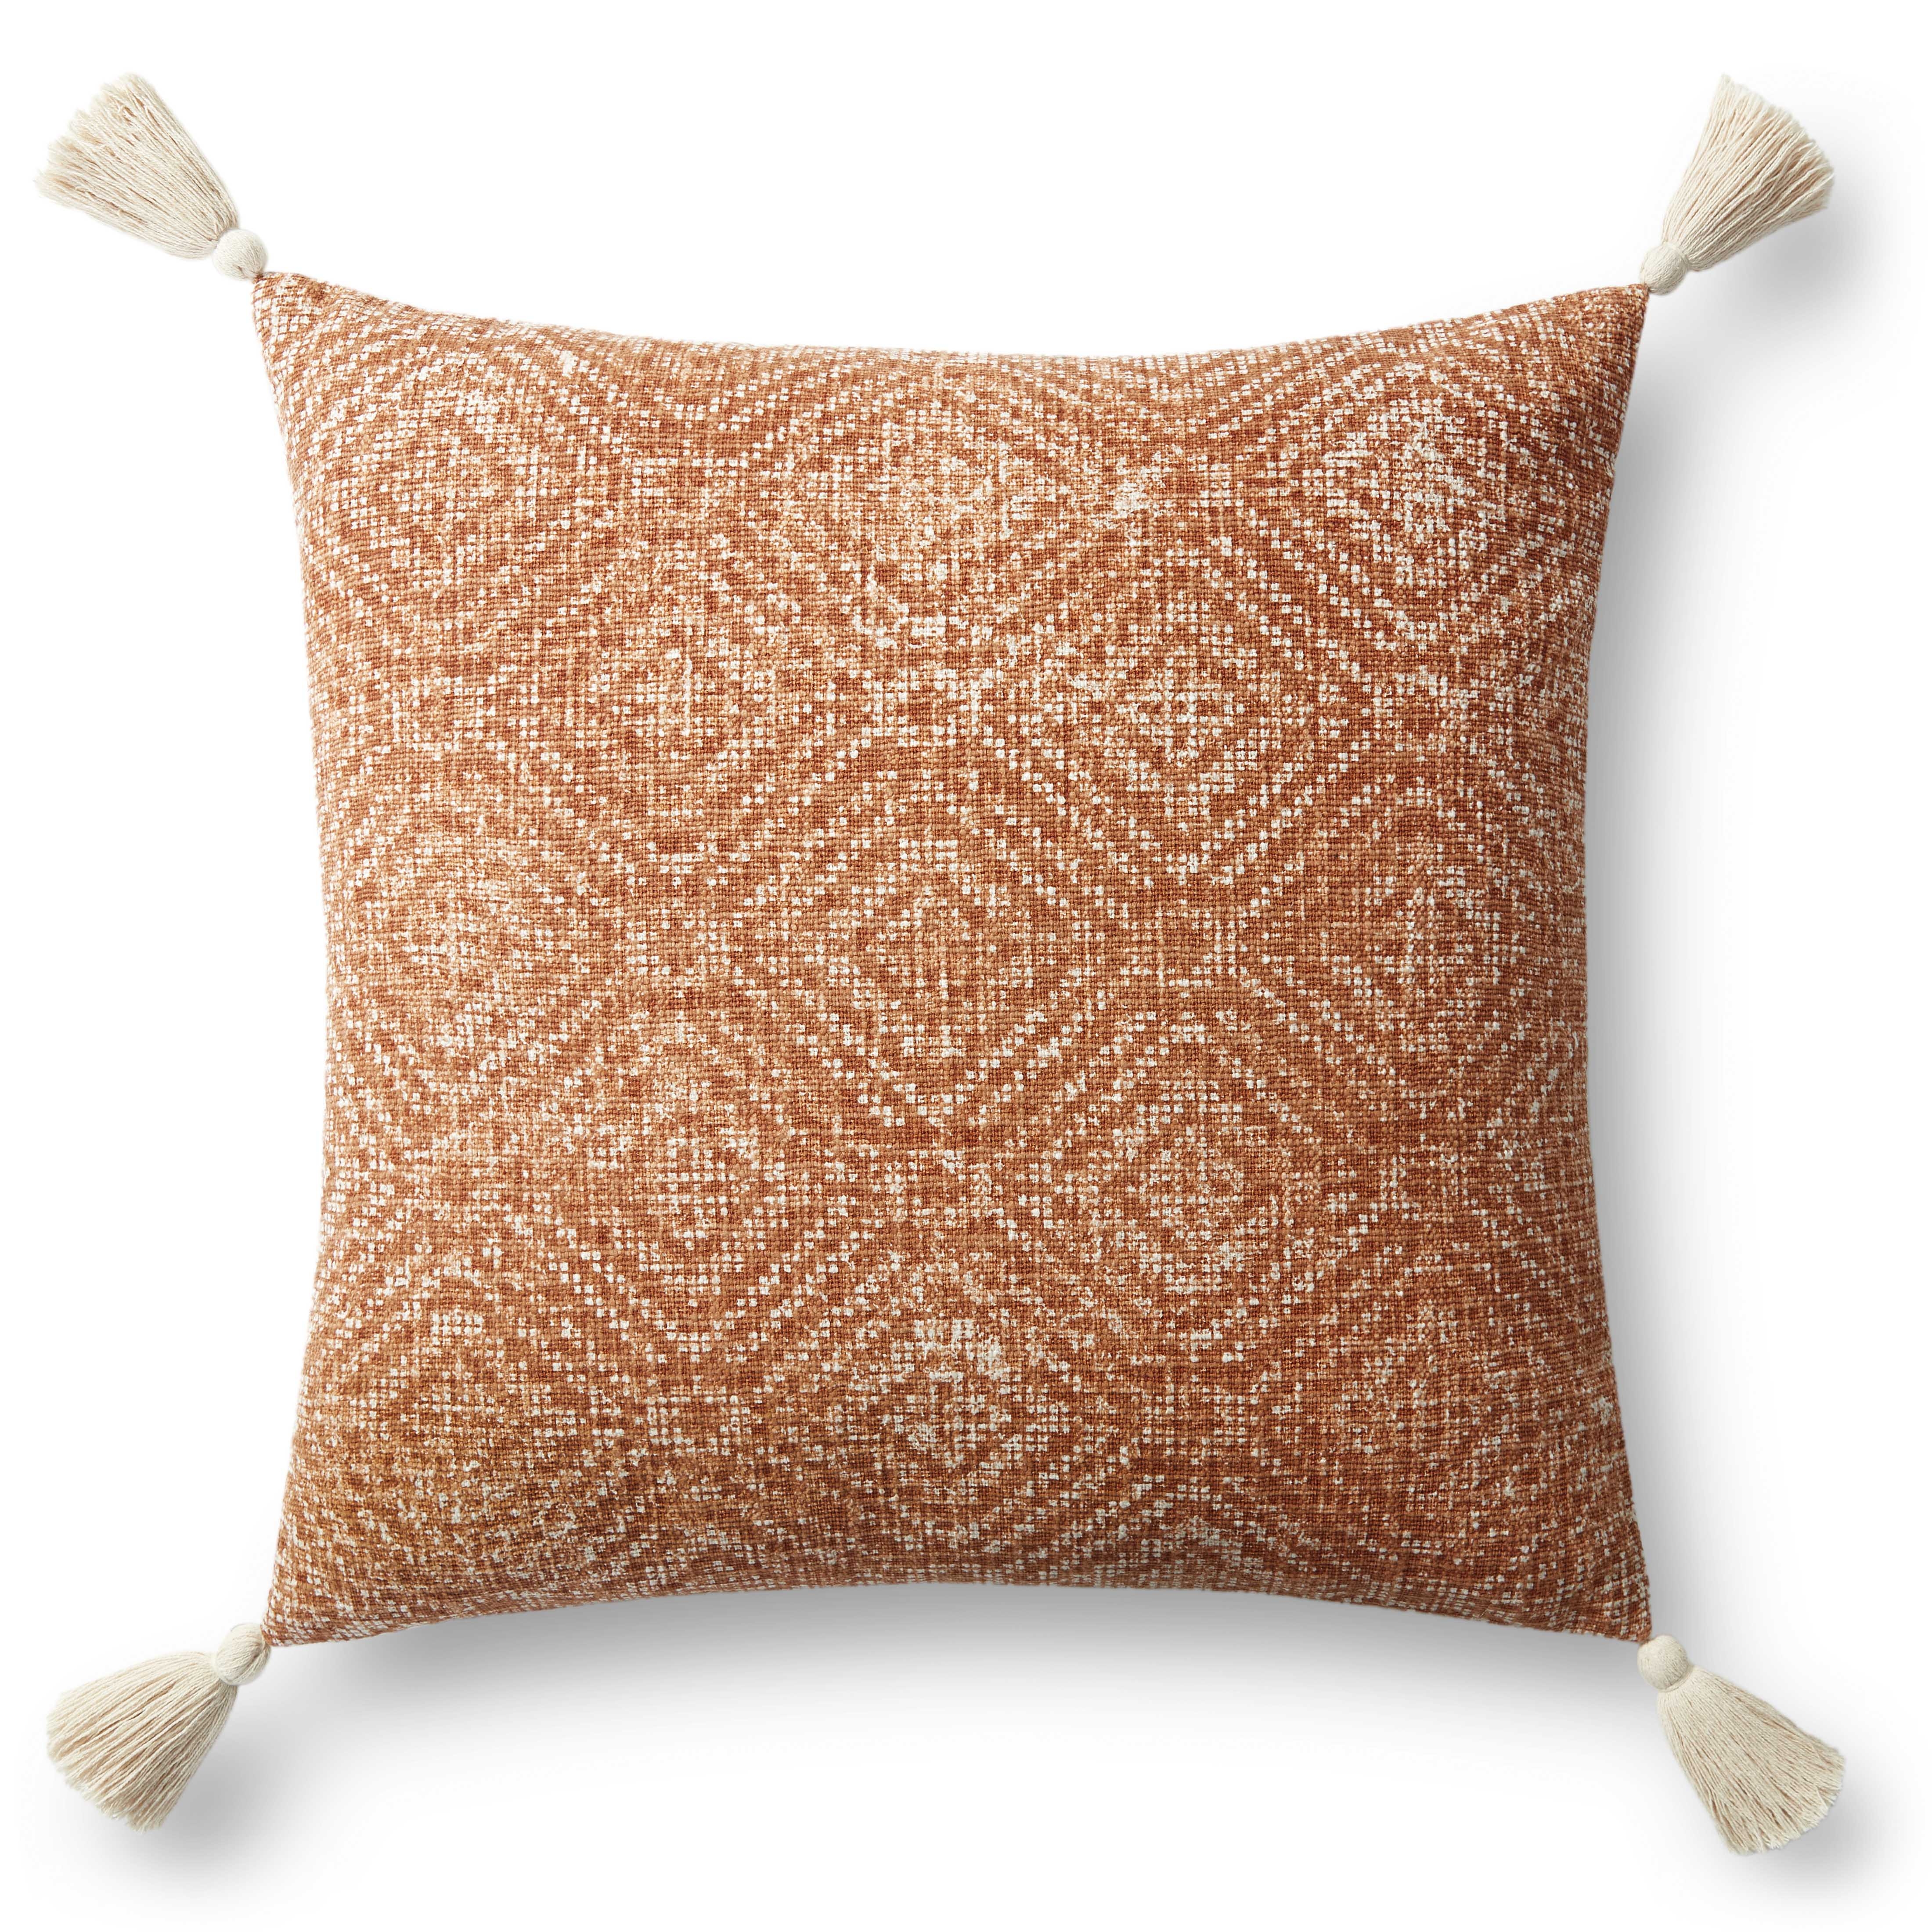 Loloi Pillows P0621 Orange 22" x 22" Cover Only - Image 0